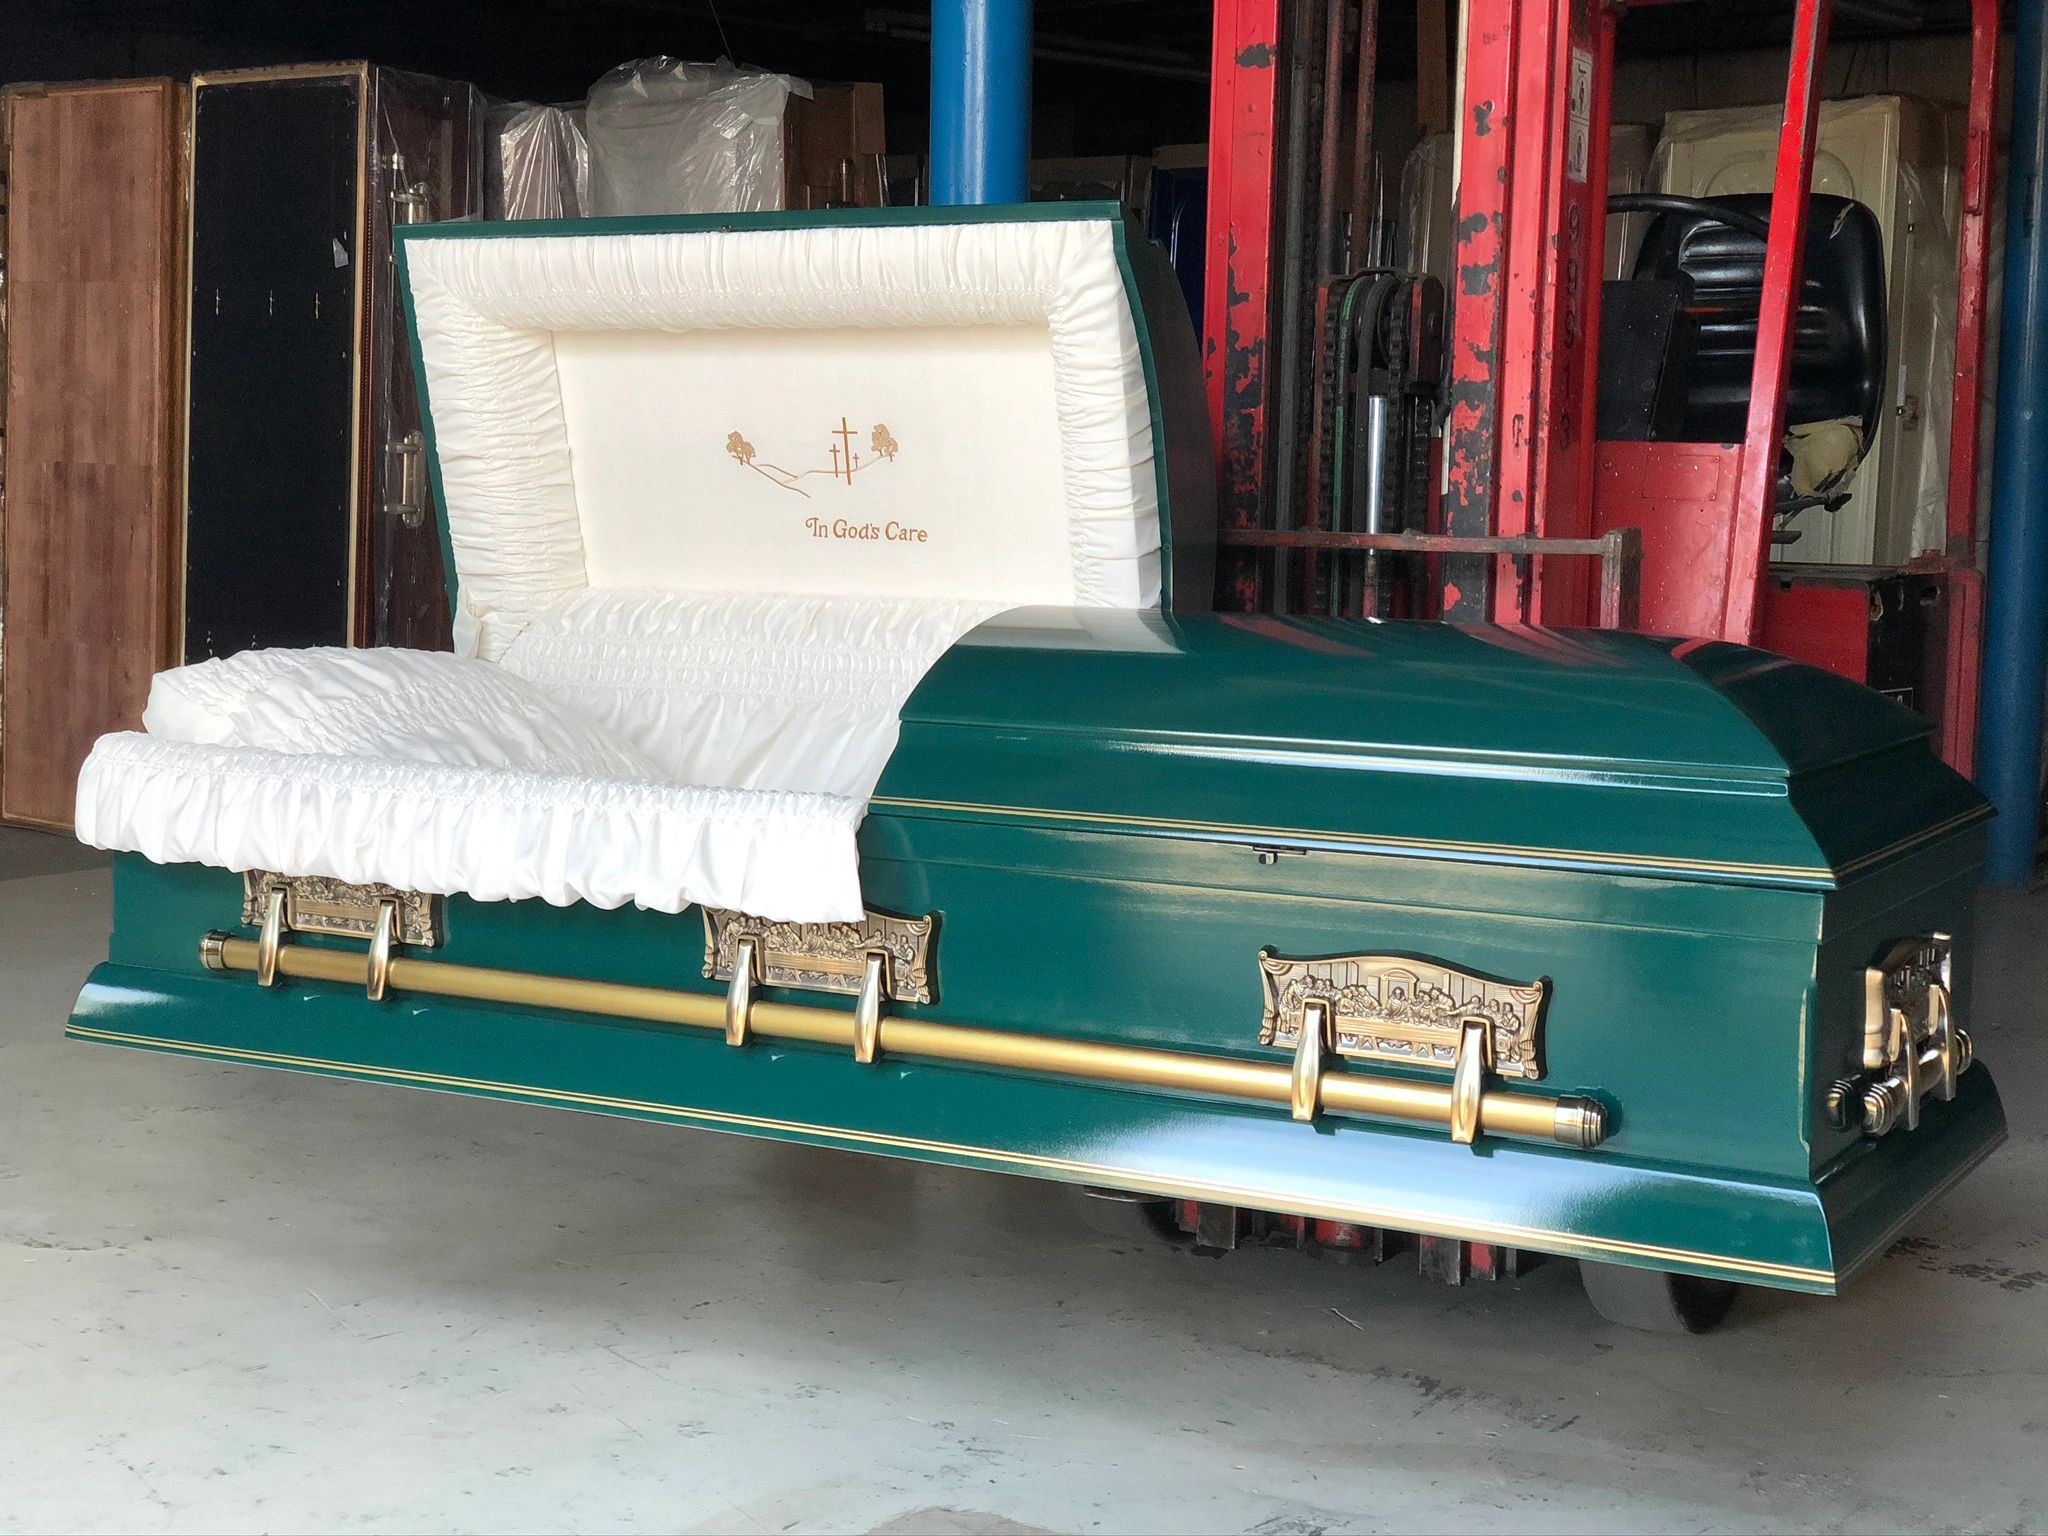 {"blocks":[{"key":"2930b","text":"Our client requested Forest Green with Gold Trim. We LOVE this color on a casket!","type":"unstyled","depth":0,"inlineStyleRanges":[],"entityRanges":[],"data":{}}],"entityMap":{}}